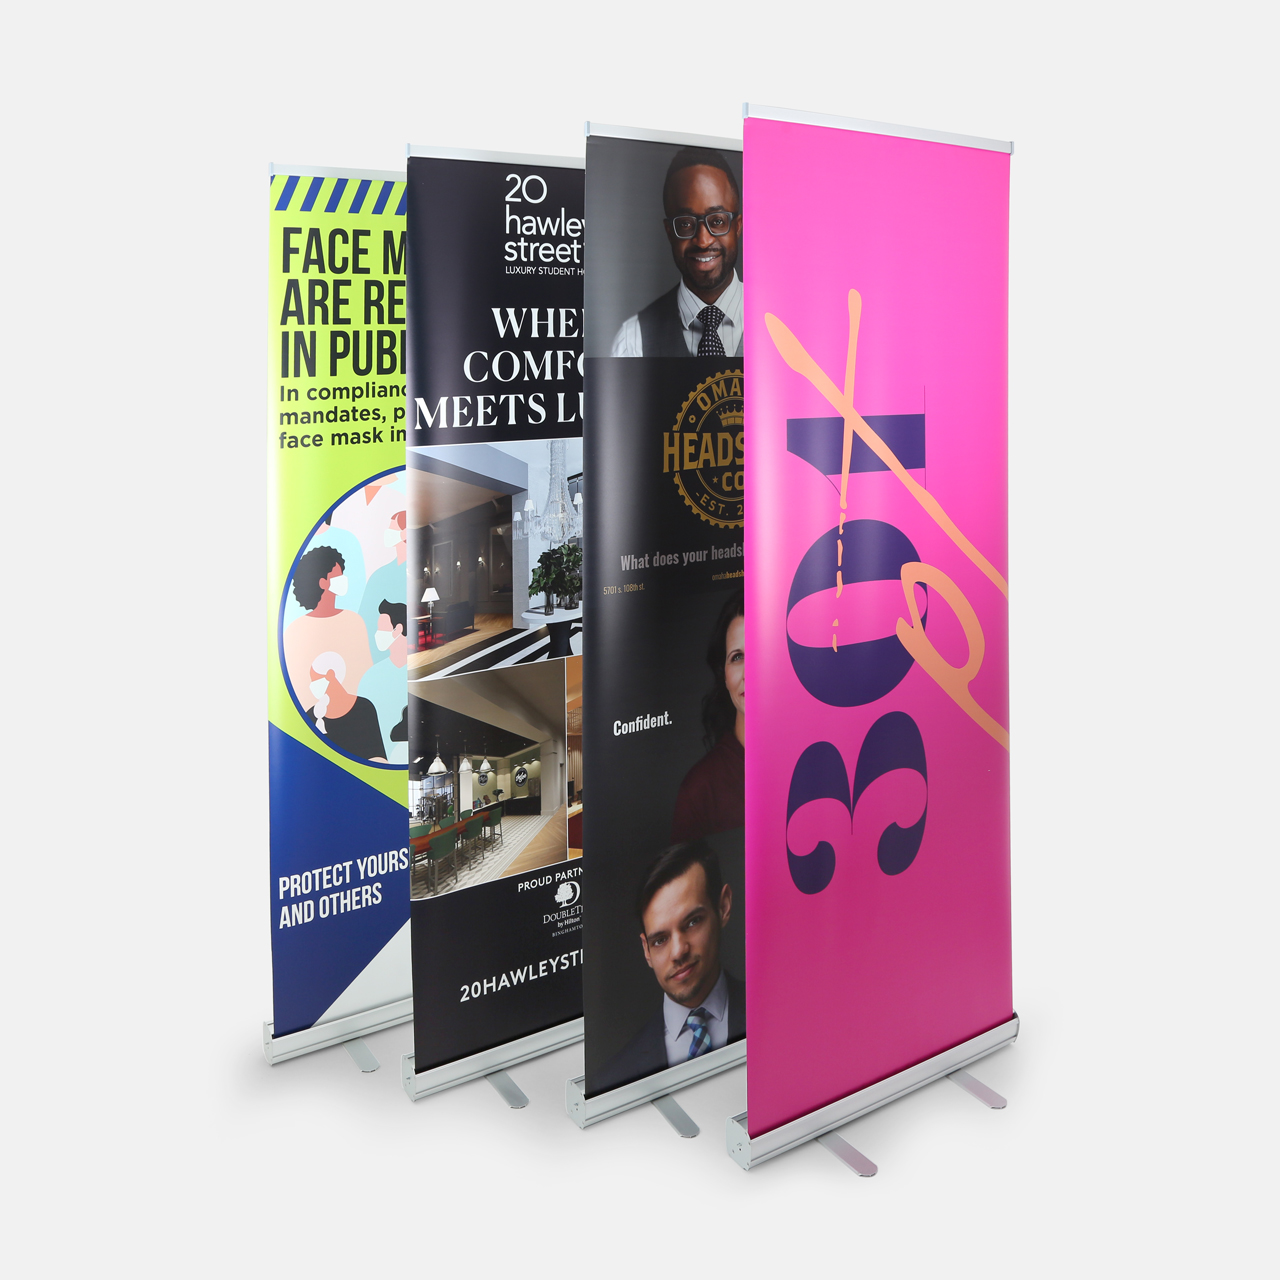 Four pop-up banners standing in a row with various designs and imagery.